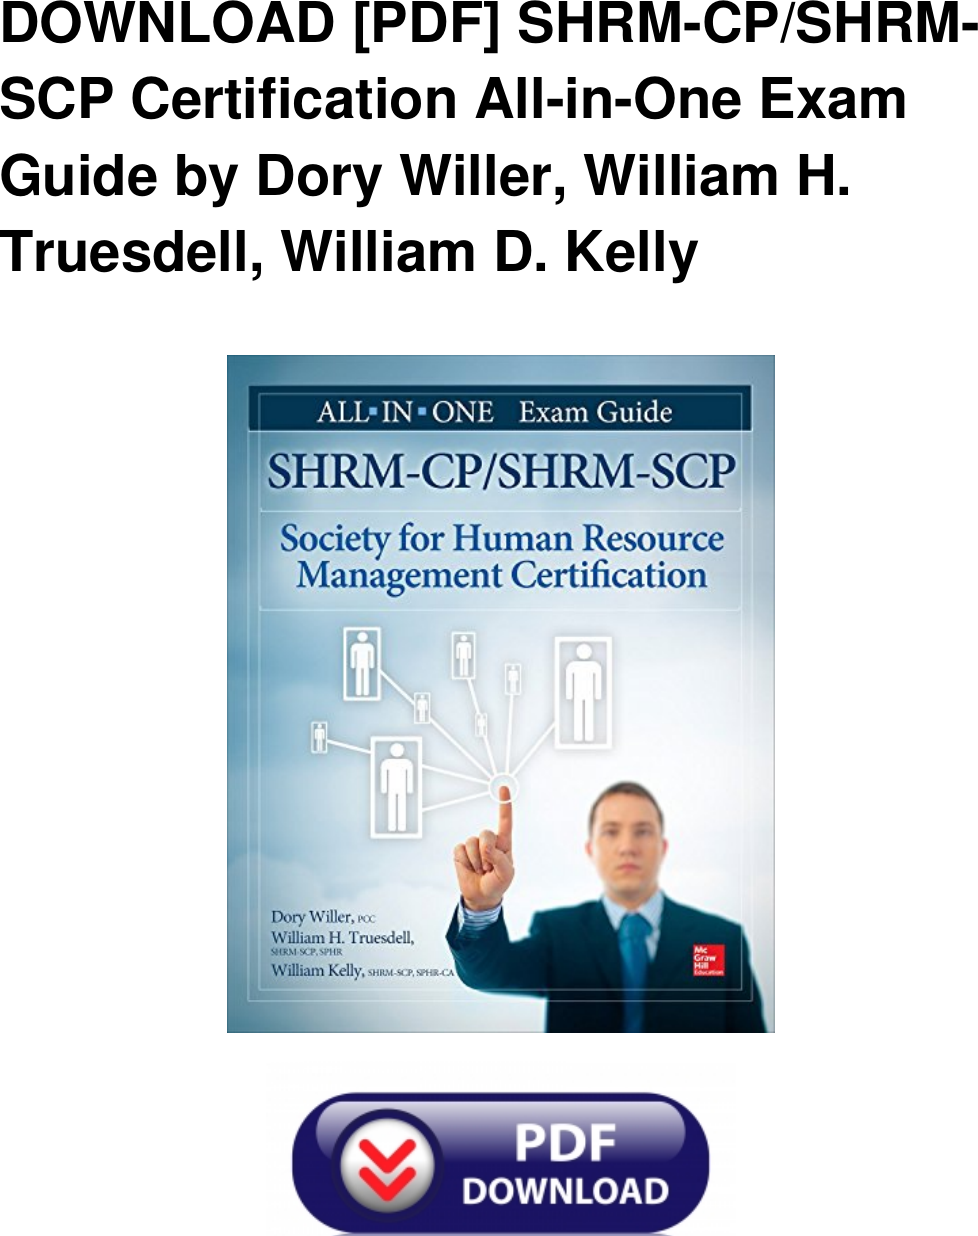 [PDF] SHRM CP/SHRM SCP Certification All in One Exam Guide By Dory